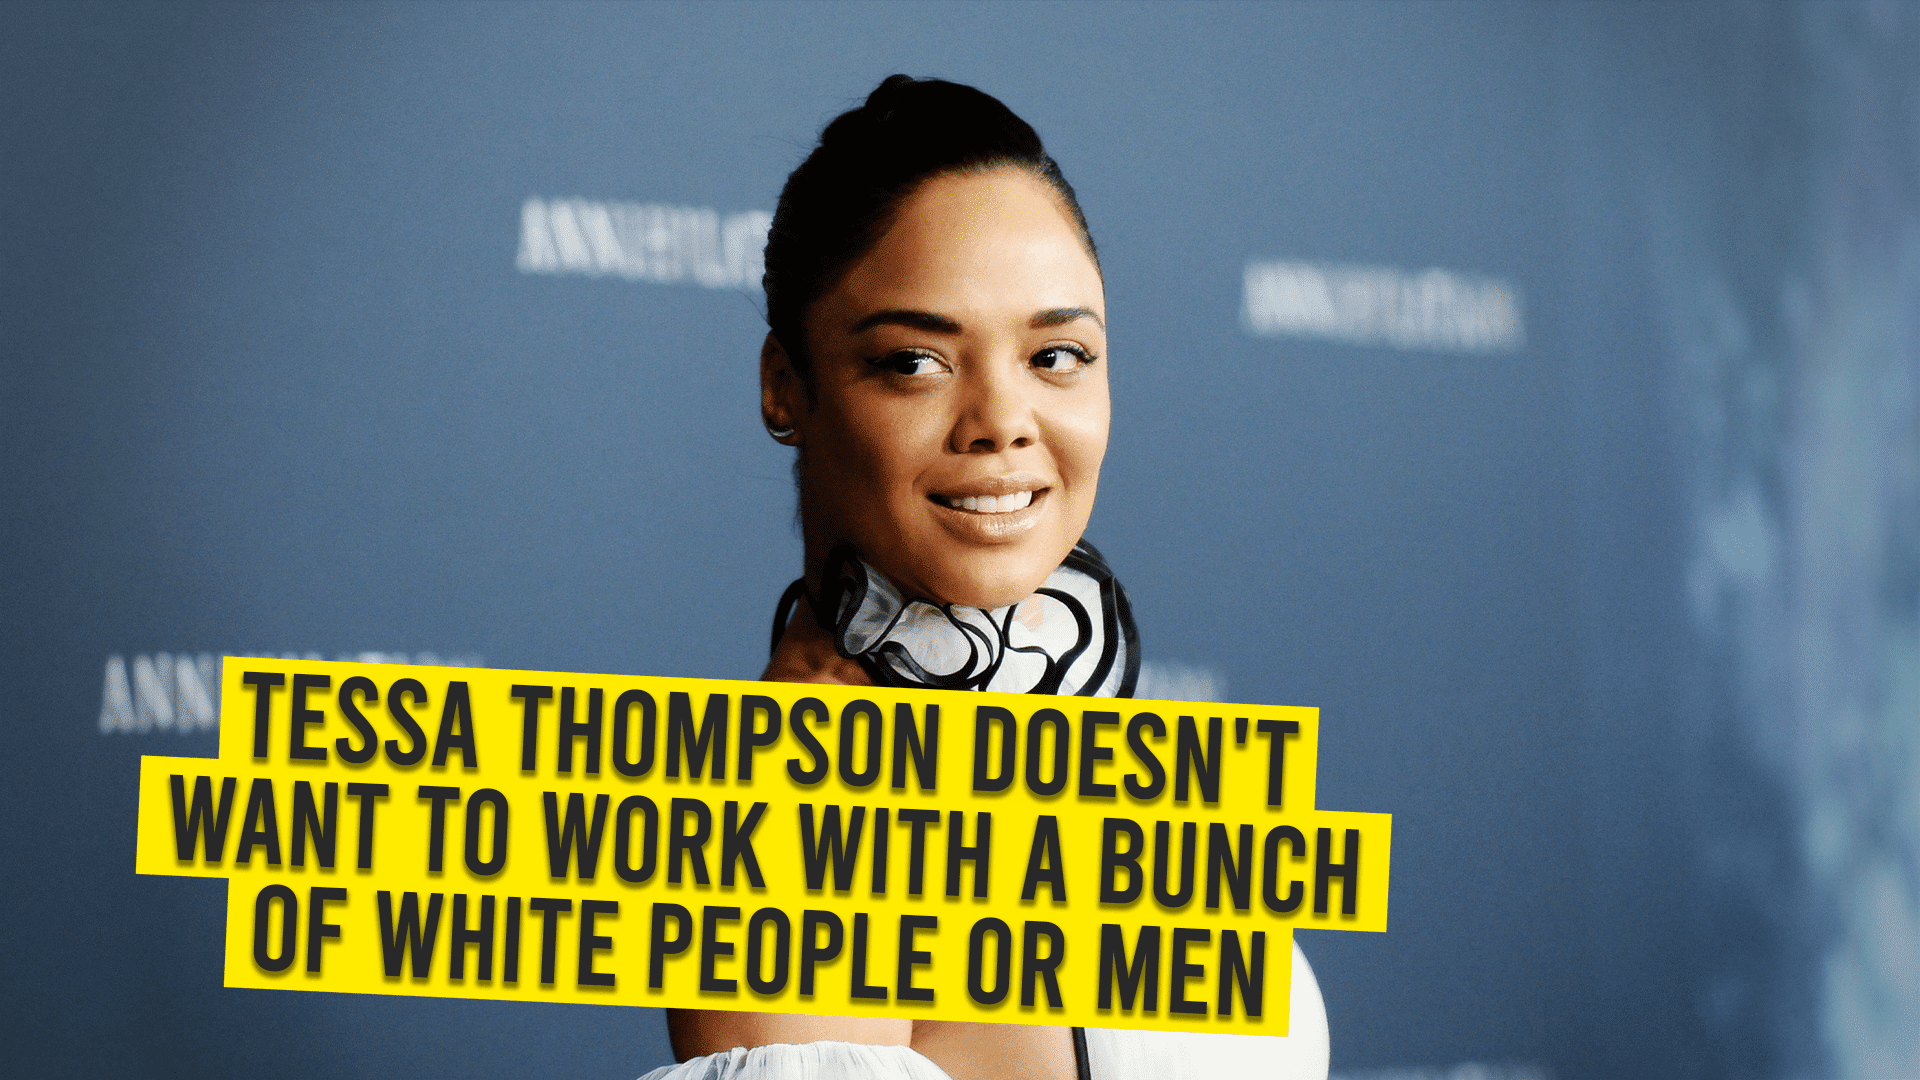 Tessa Thompson Doesn’t Want To Work With A Bunch Of White People Or Men